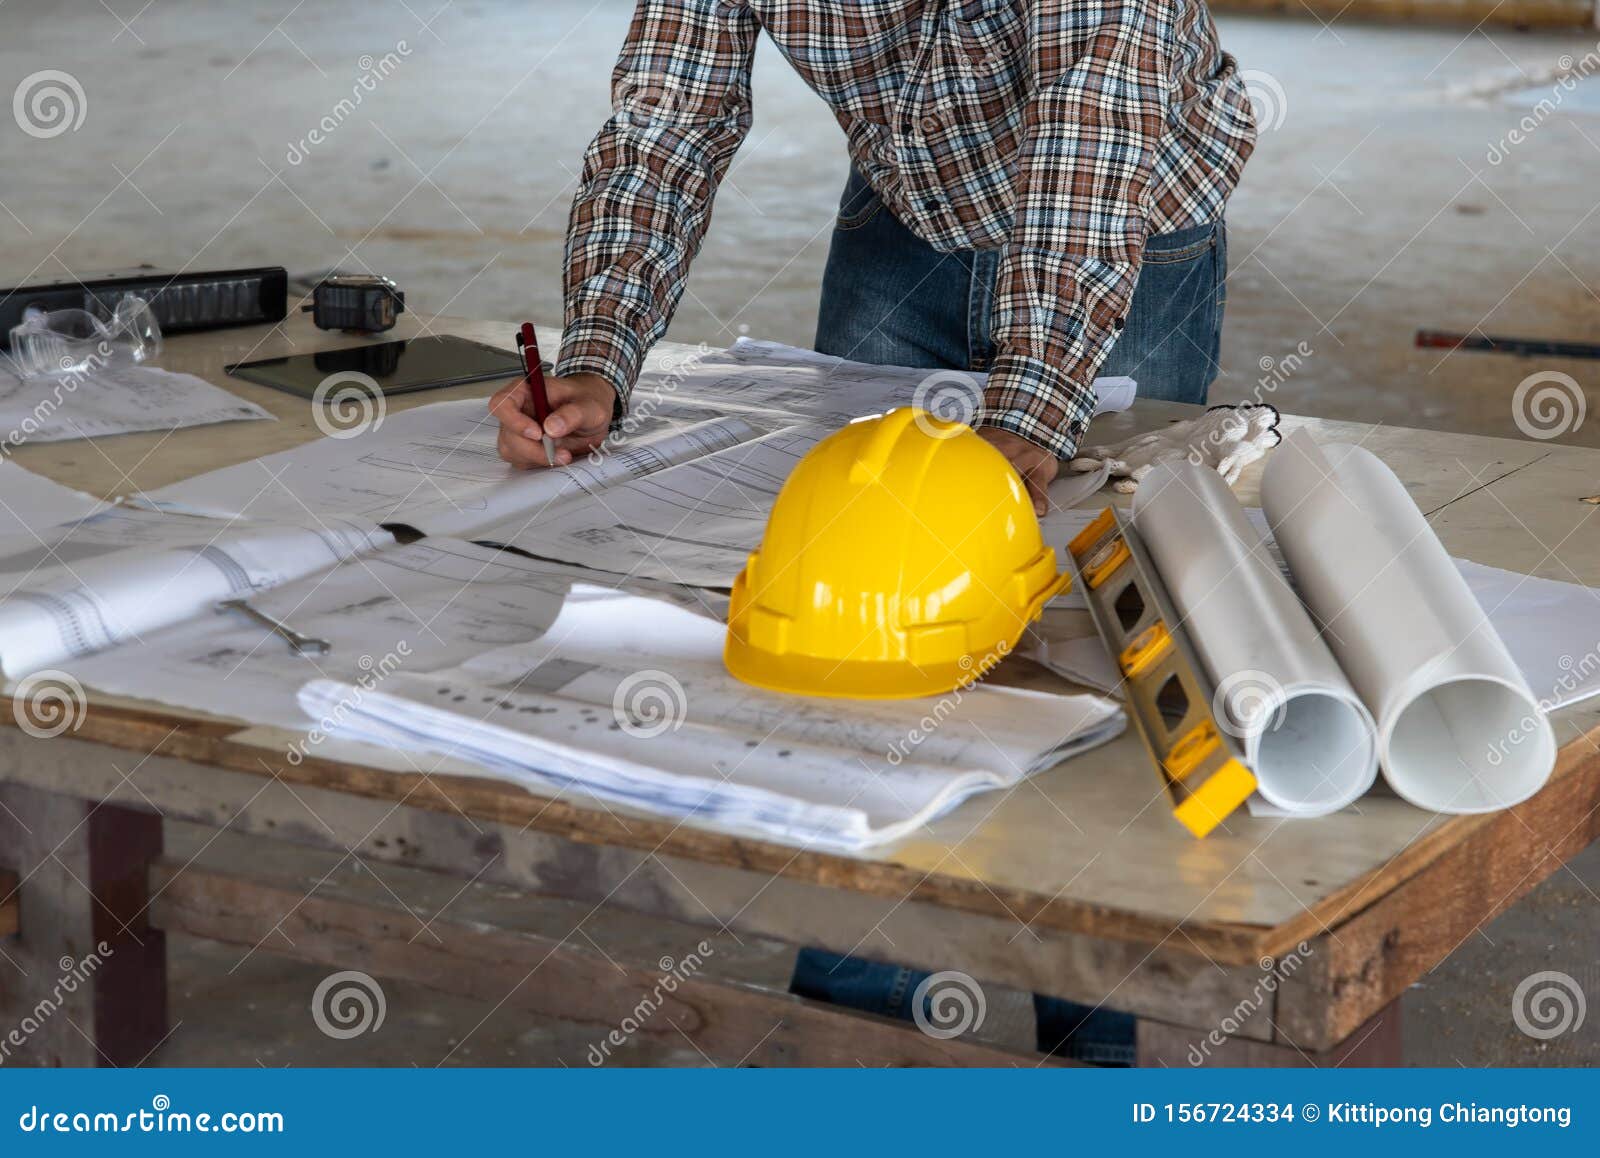 happiness smile professional businessman consulting with engineering/ architecture in construction renovate building site.